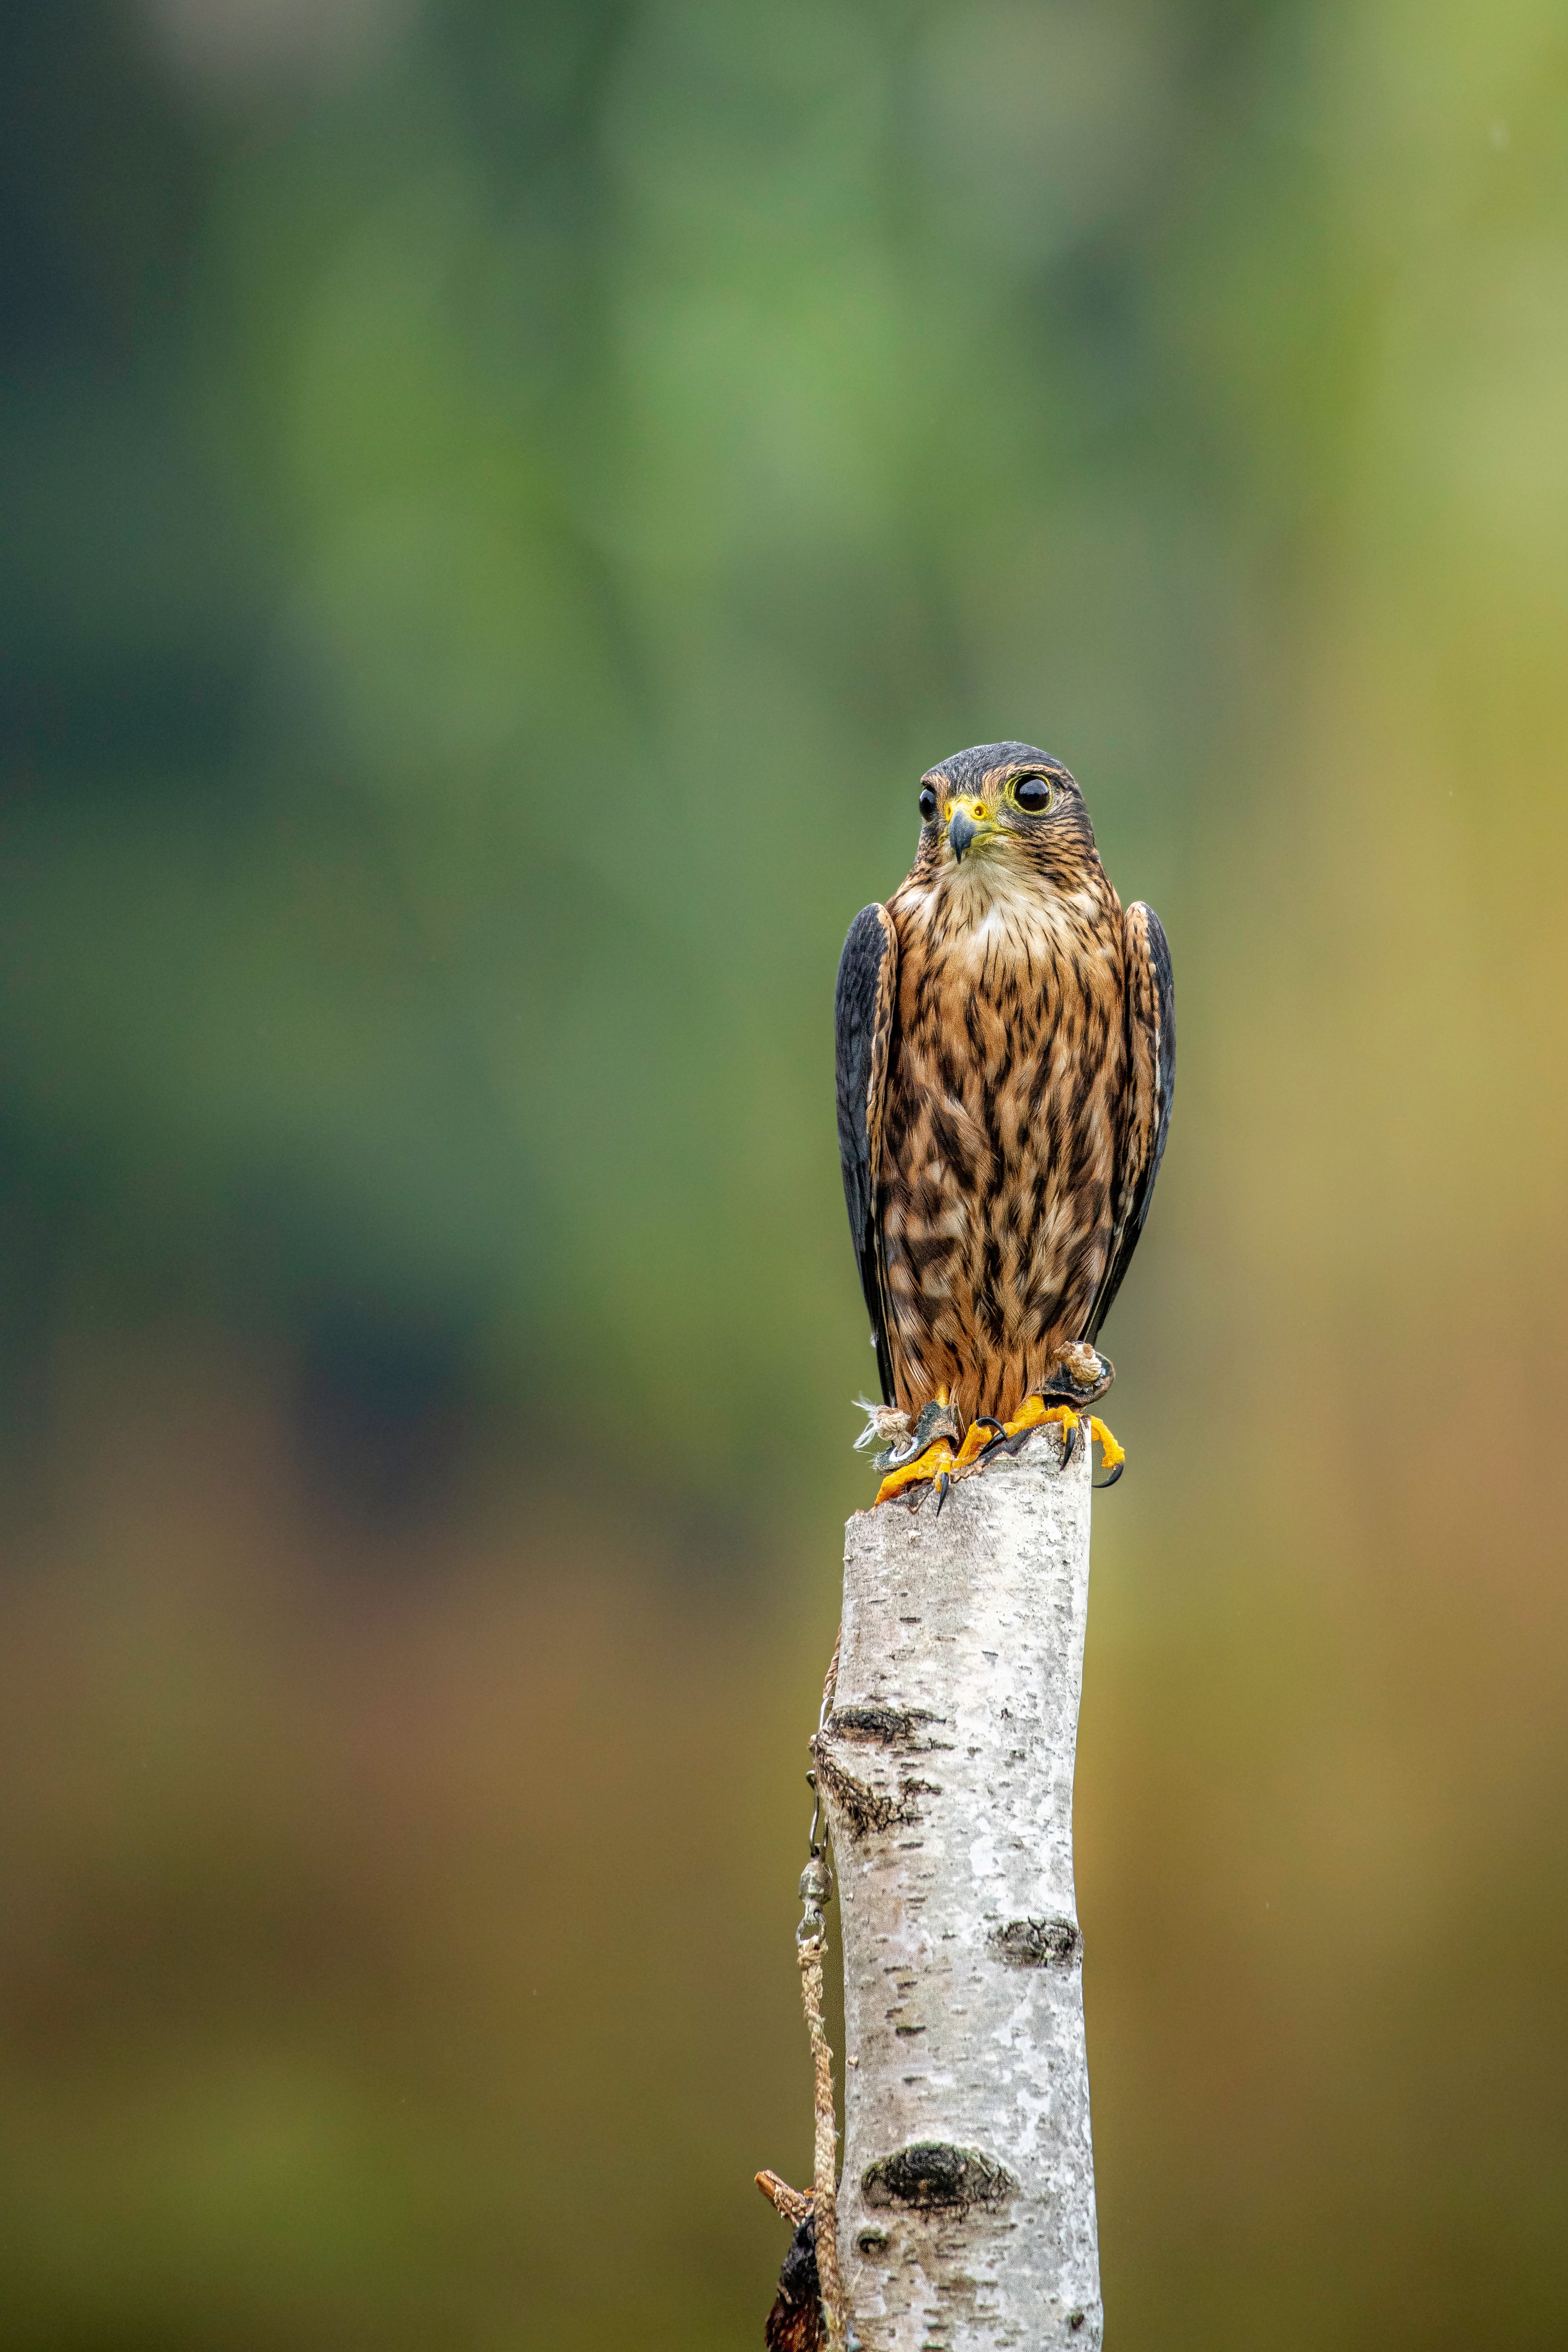 A merlin falcon perched on a tree stump